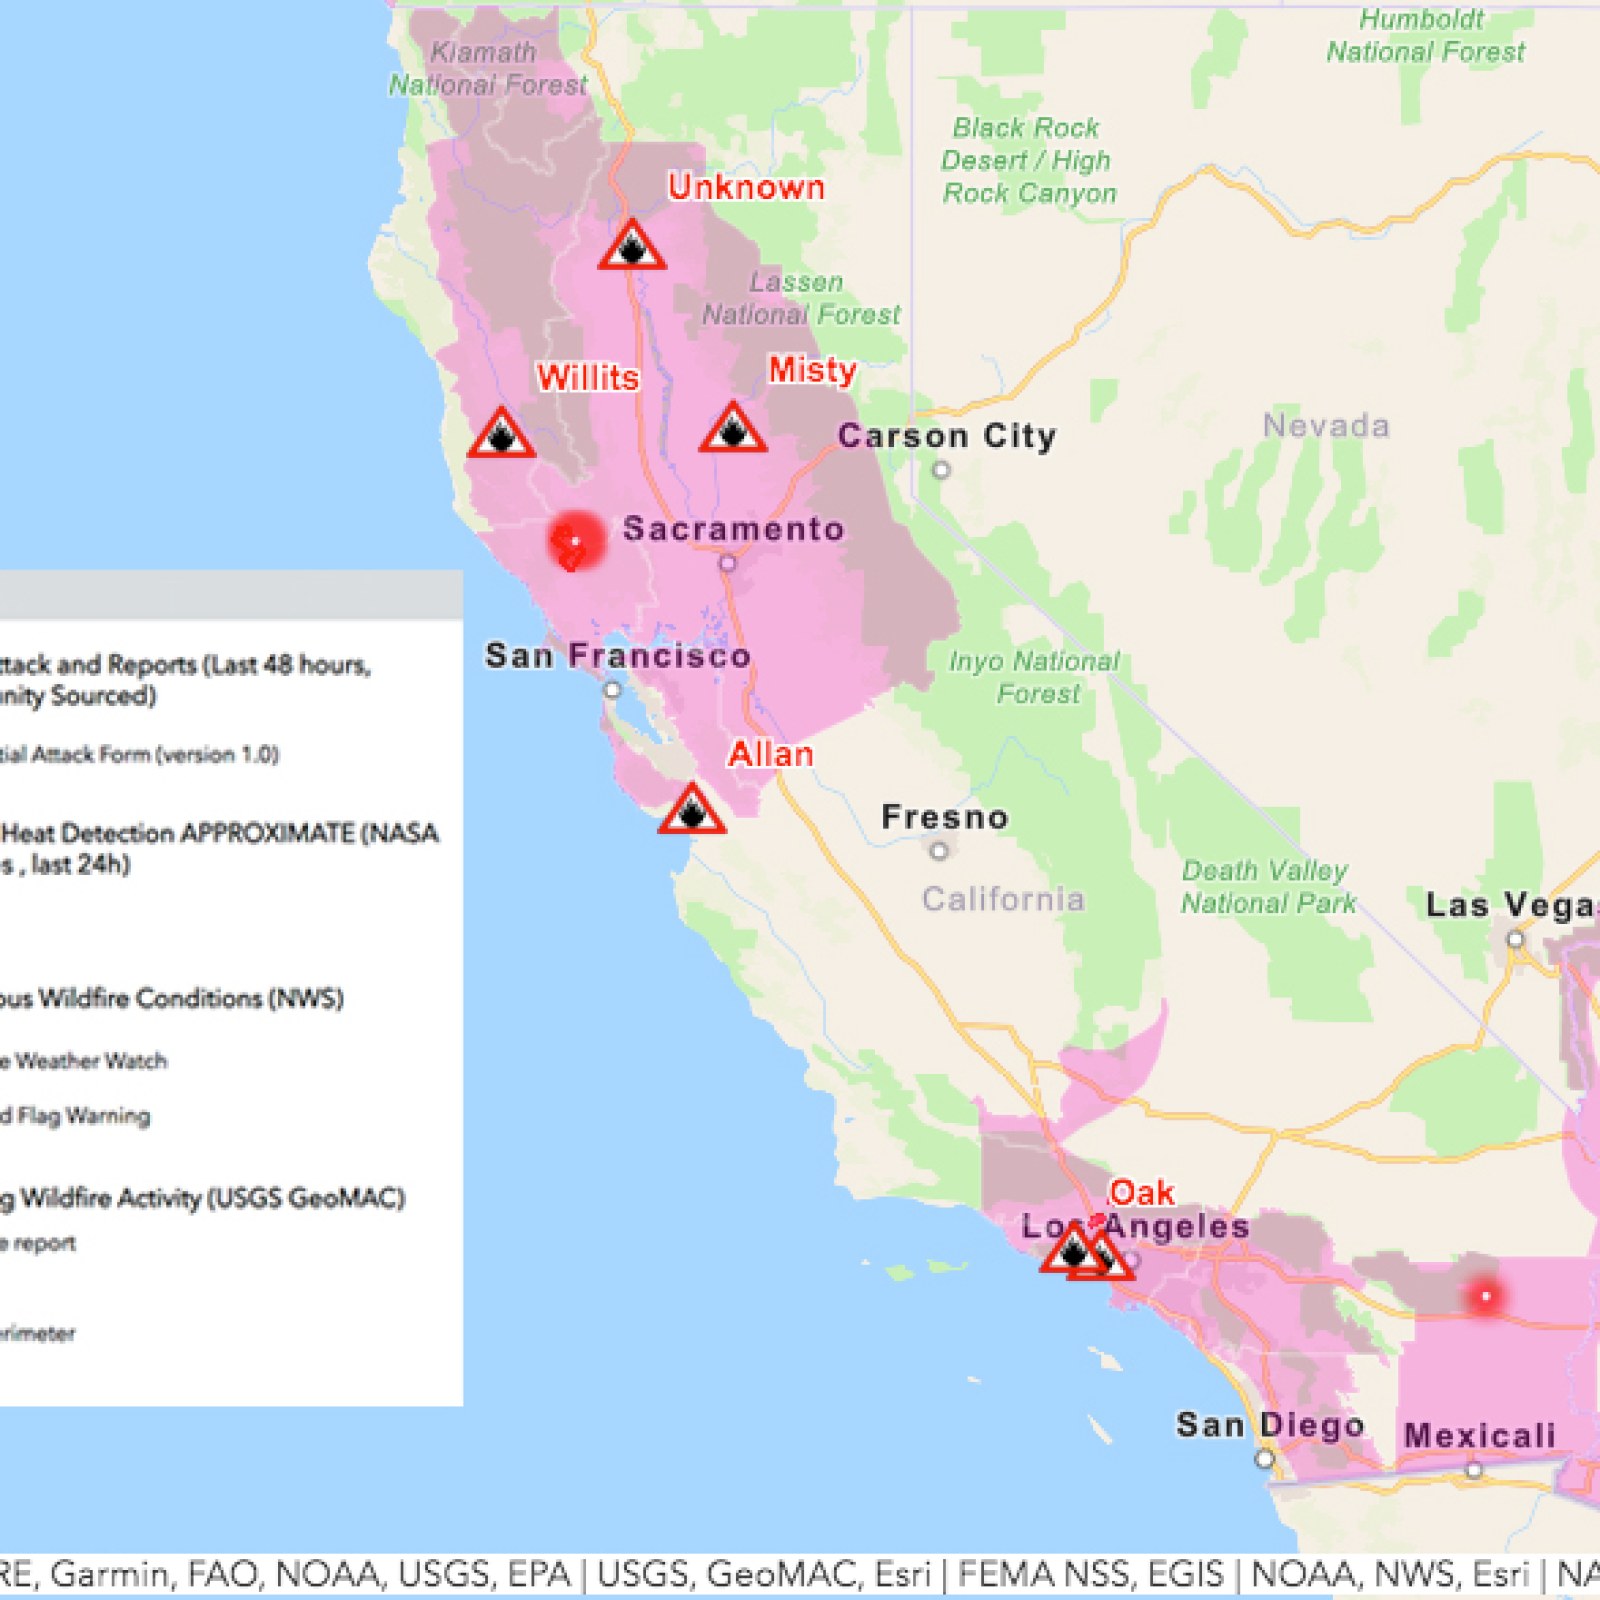 fires in california map California Fire Map Getty Fire Kincade Fire Tick Fire Burris Fire Oak Fire Updates As First Ever Extreme Red Flag Warning Issued